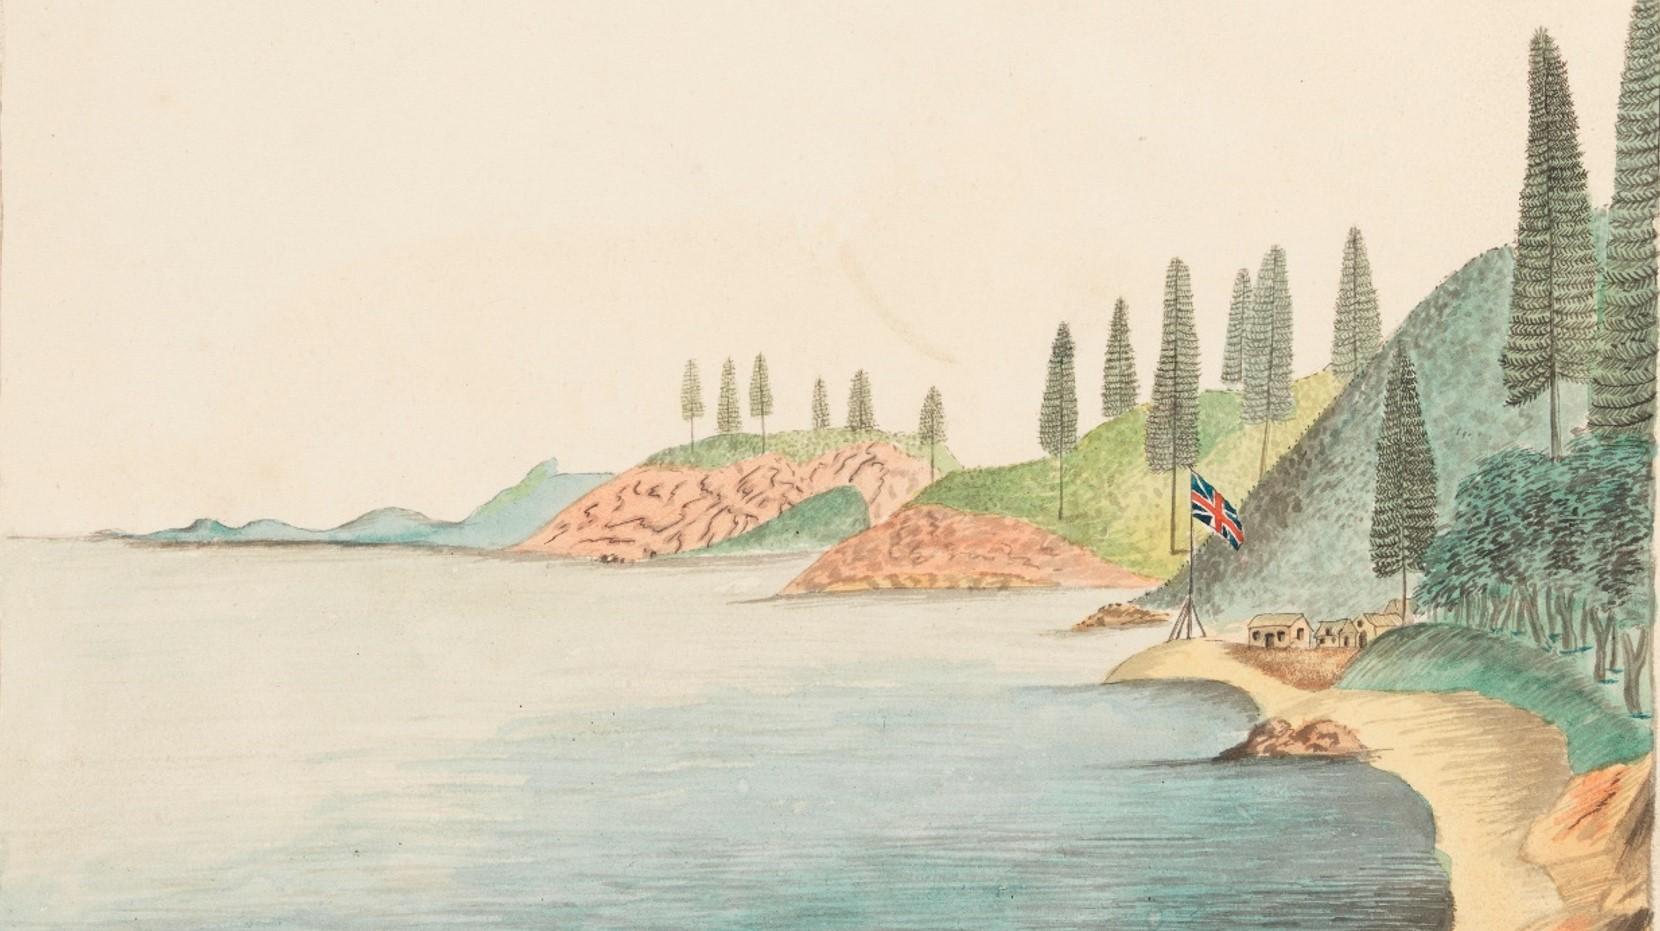 'A View of the West Side of Norfolk Island Taken from the West Side of Turtle Bay', 'The Lambert Drawings', State Library of New South Wales